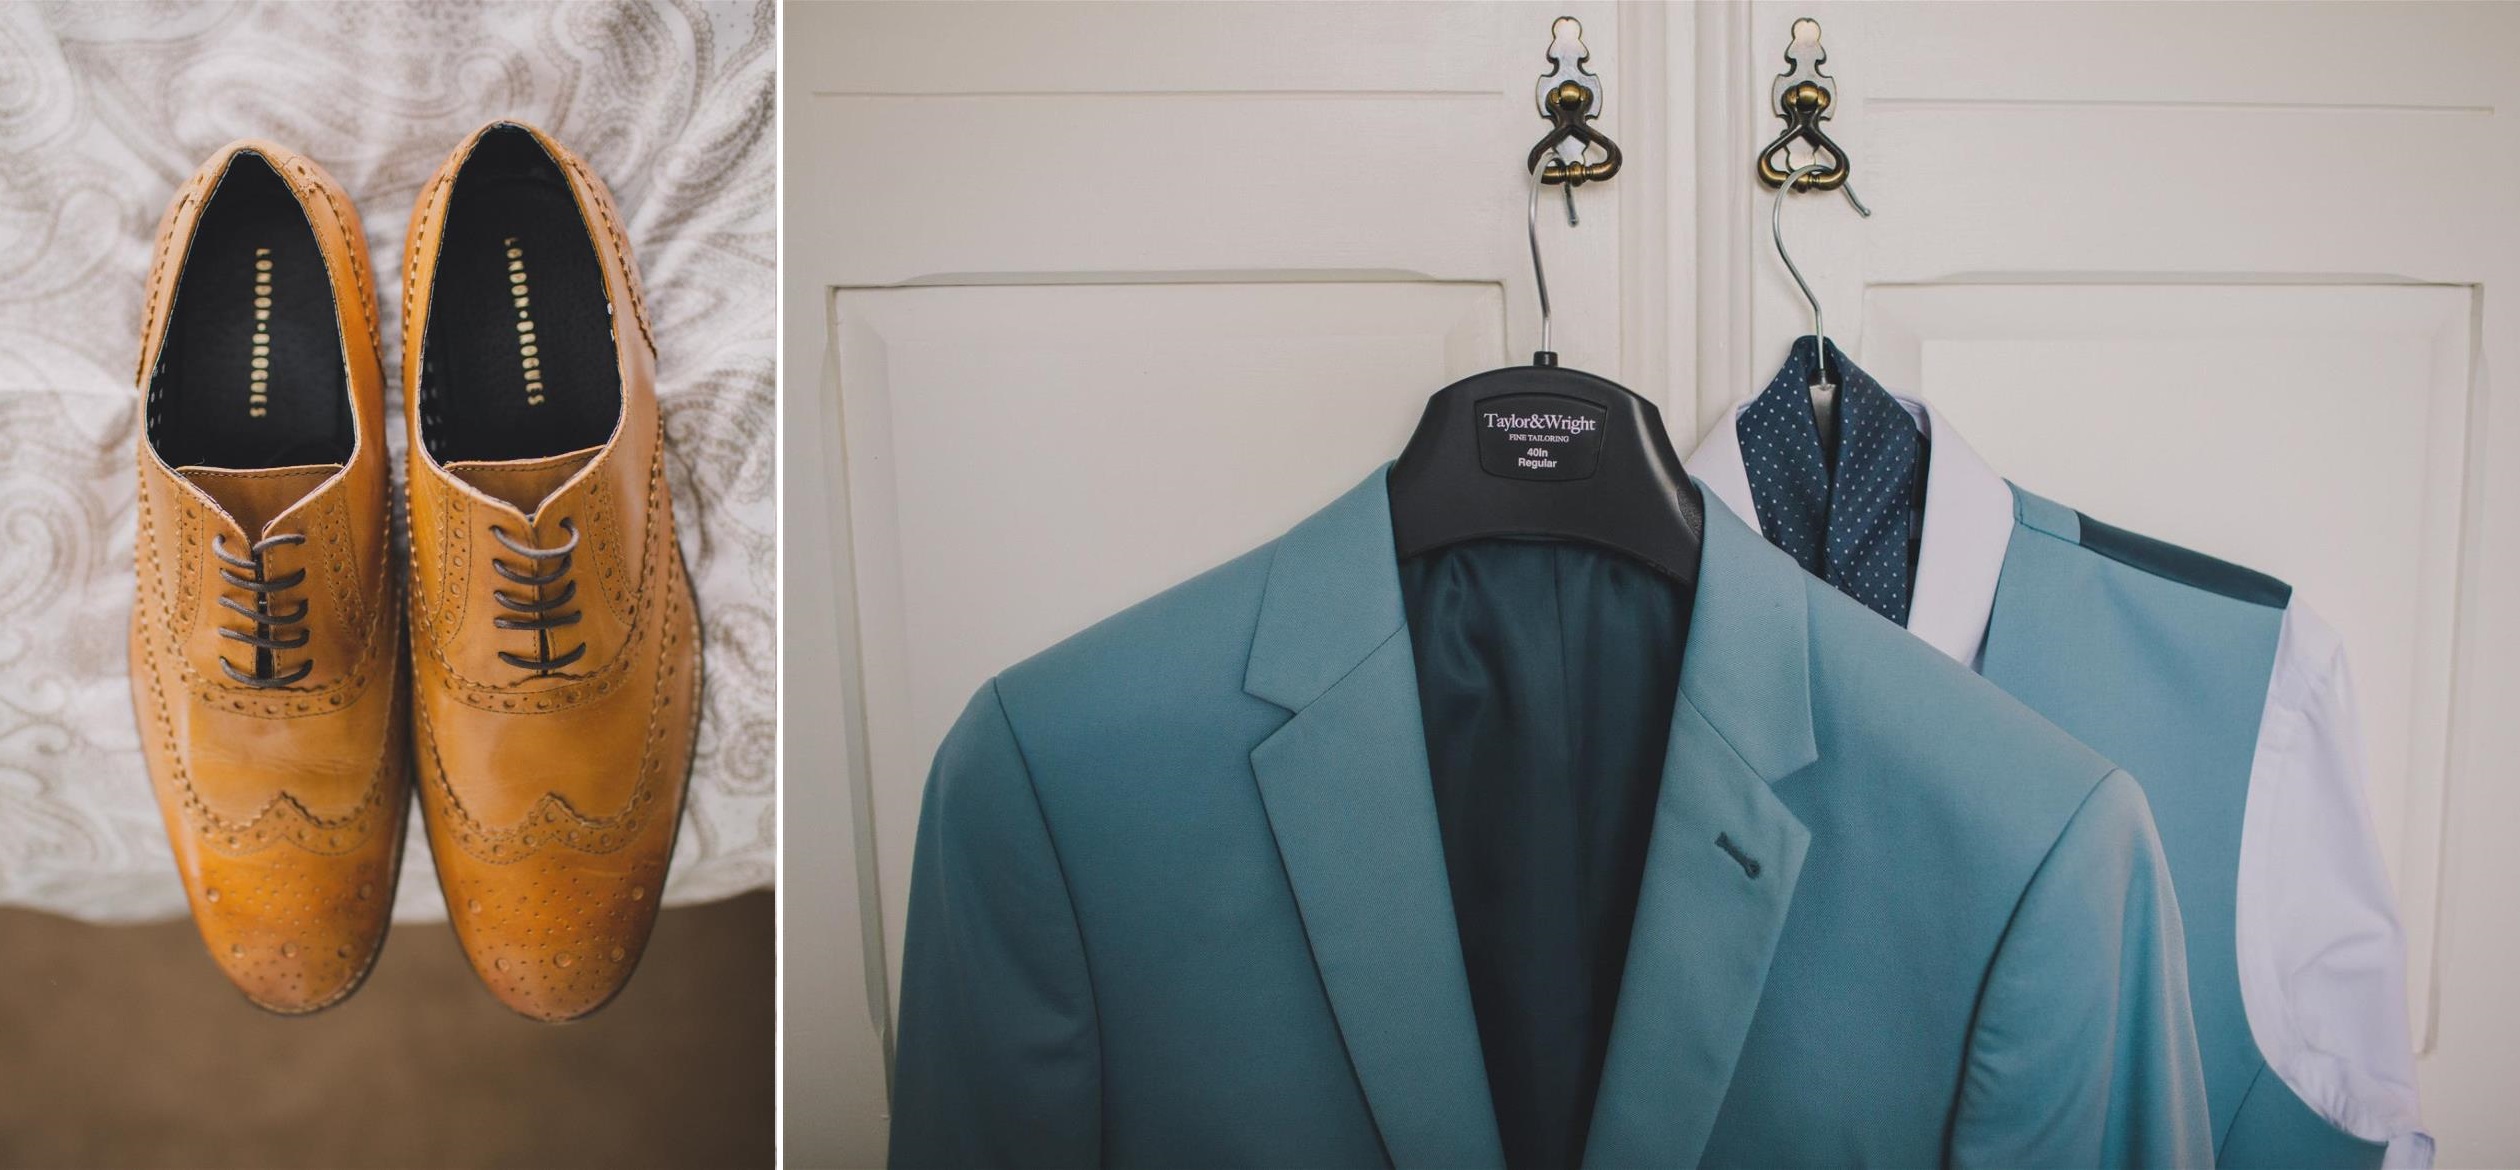 Groom's Suit - A Spring 1960s Inspired Wedding